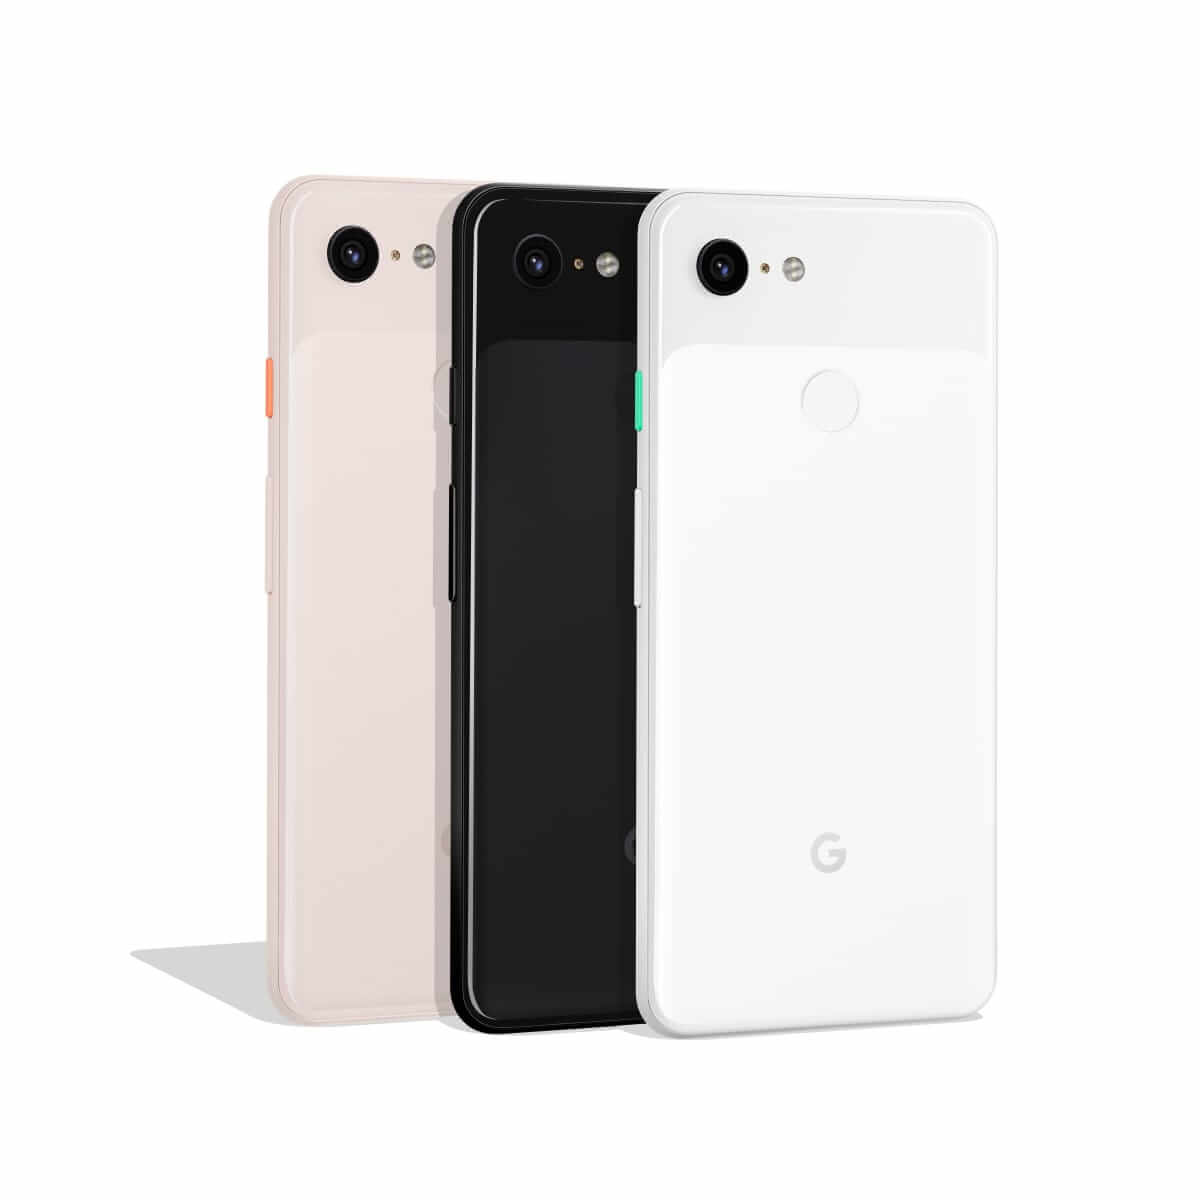 Google pixel 3 not pink, just black and clearly white